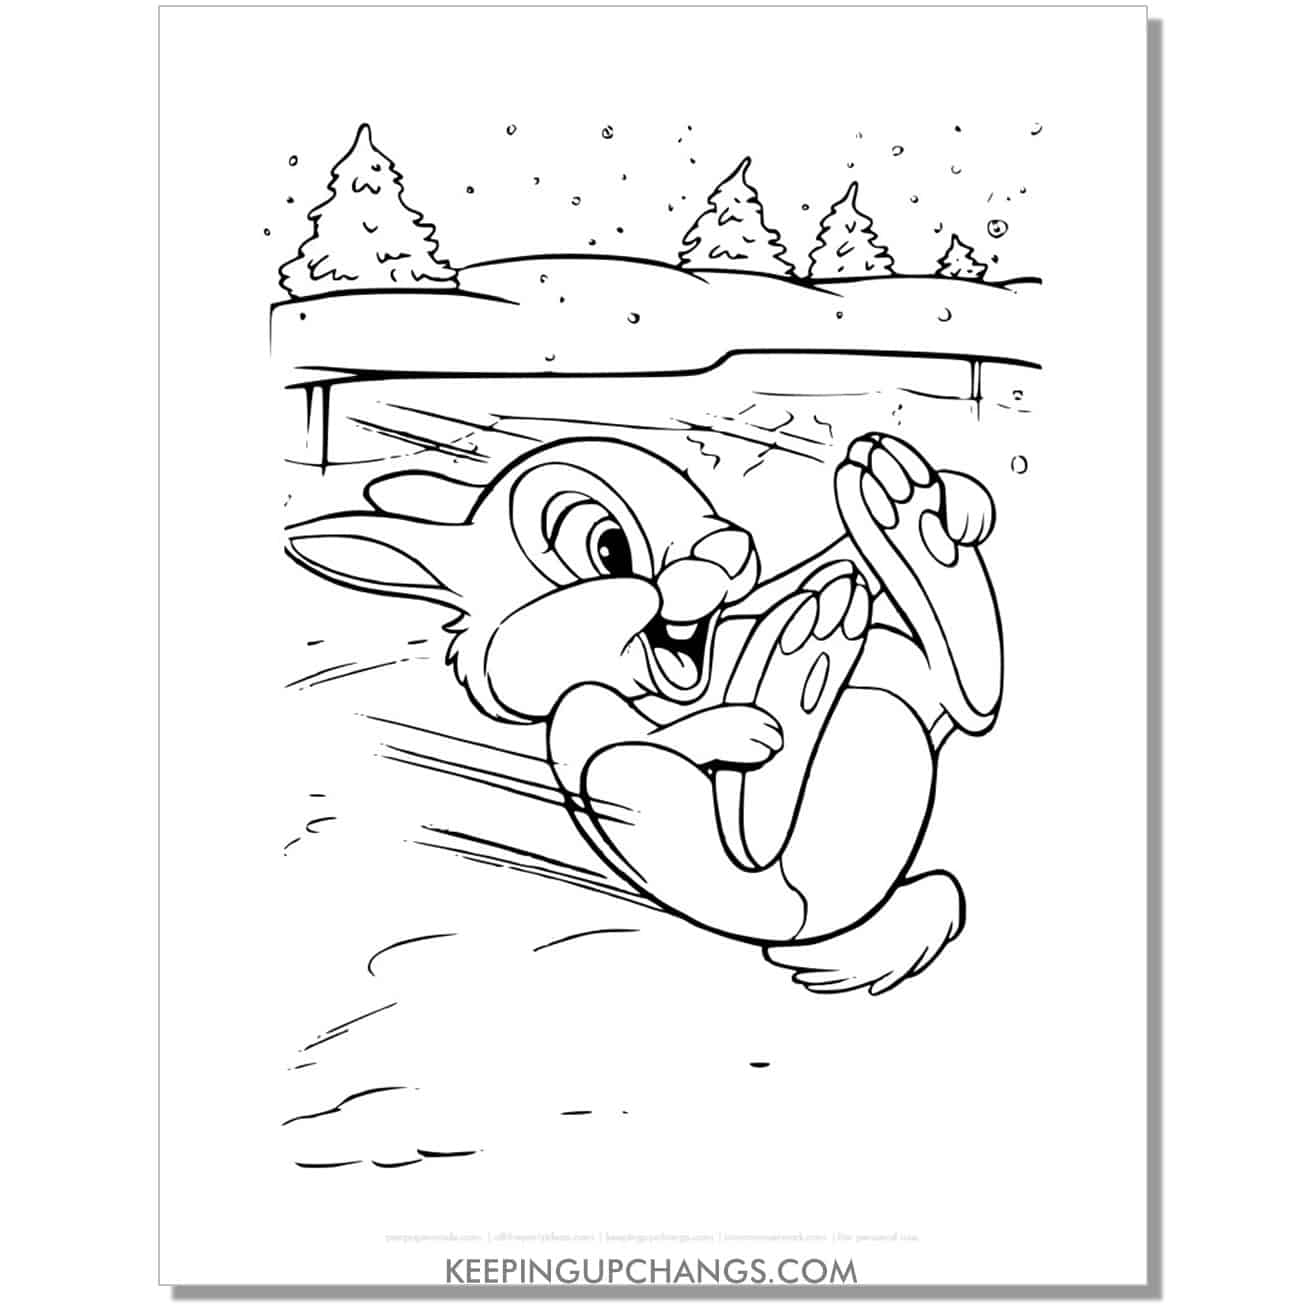 free thumper sliding on ice bambi coloring page, sheet.